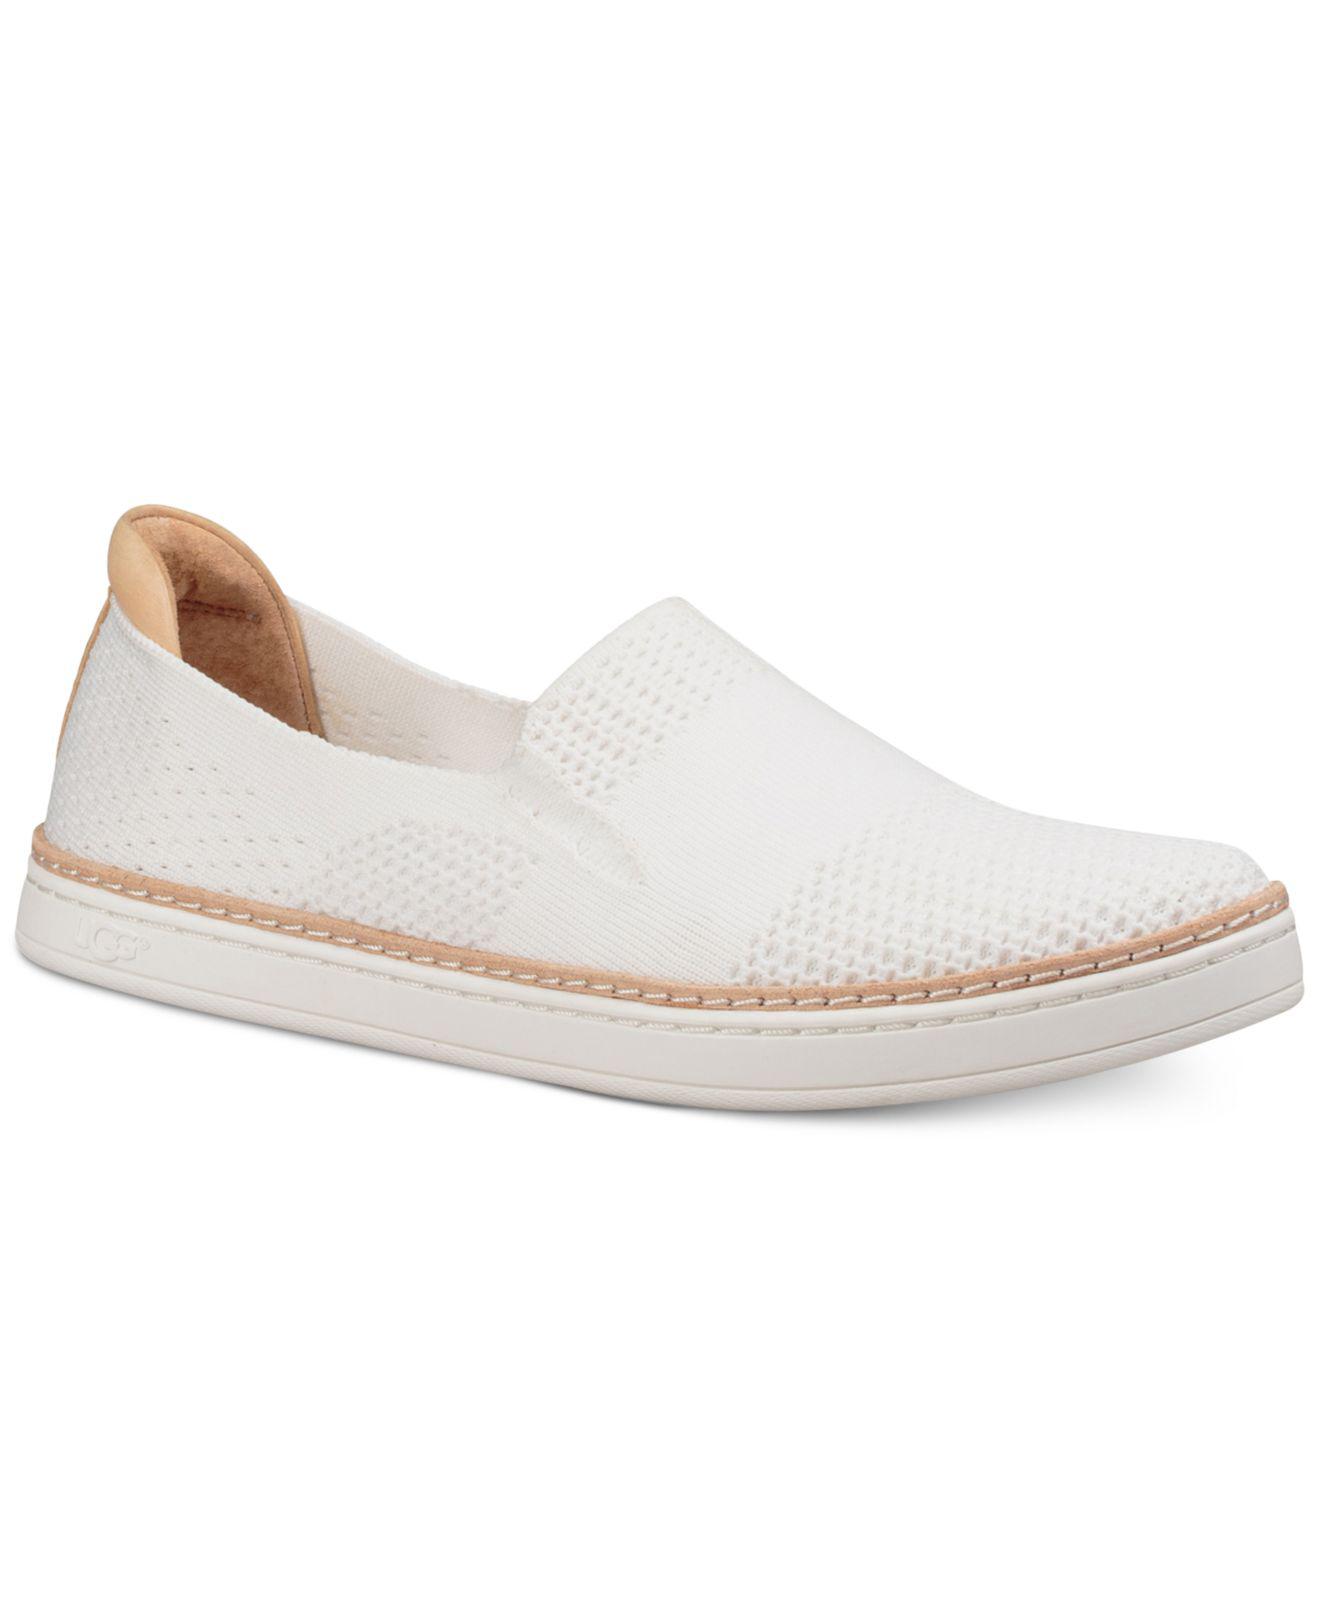 UGG Leather Sammy Slip-on Sneakers in White - Save 68% - Lyst